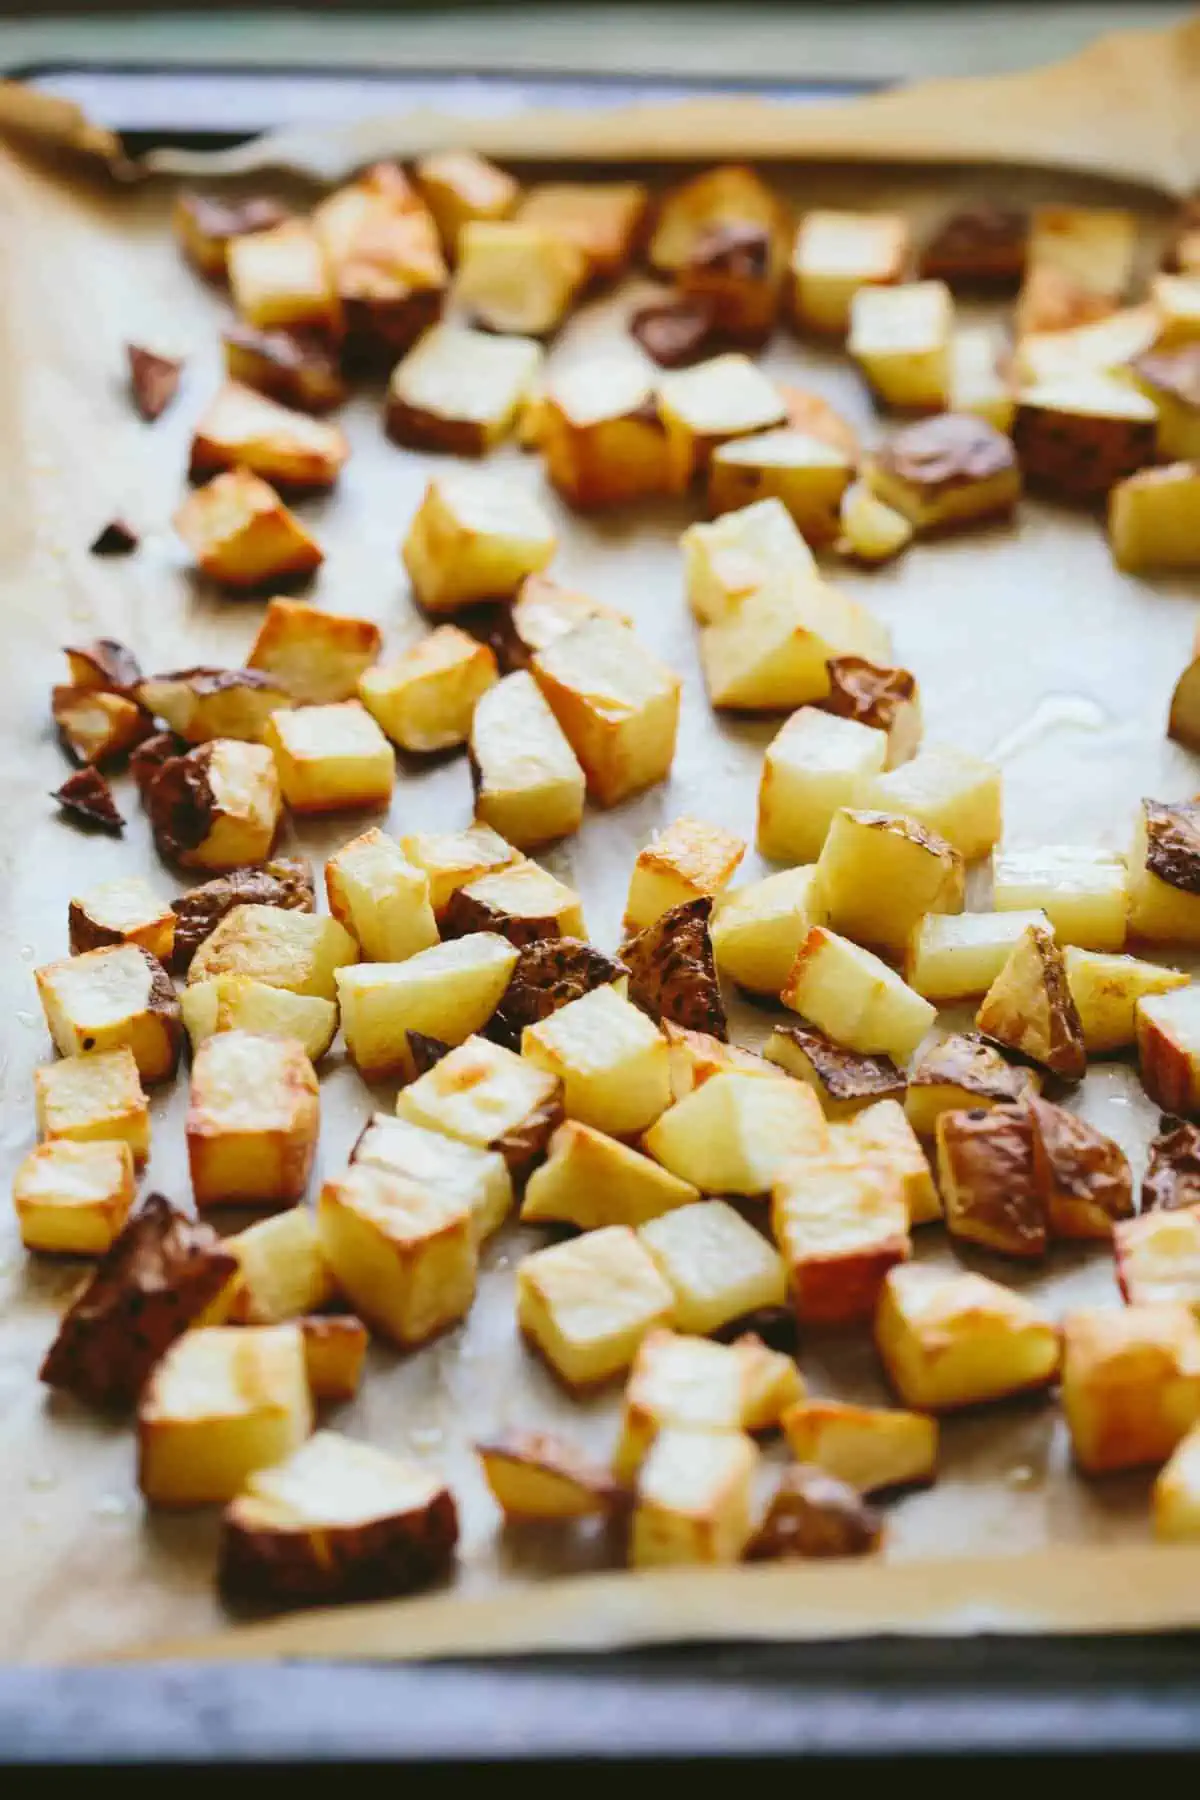 Small diced potatoes roasted on a baking sheet.